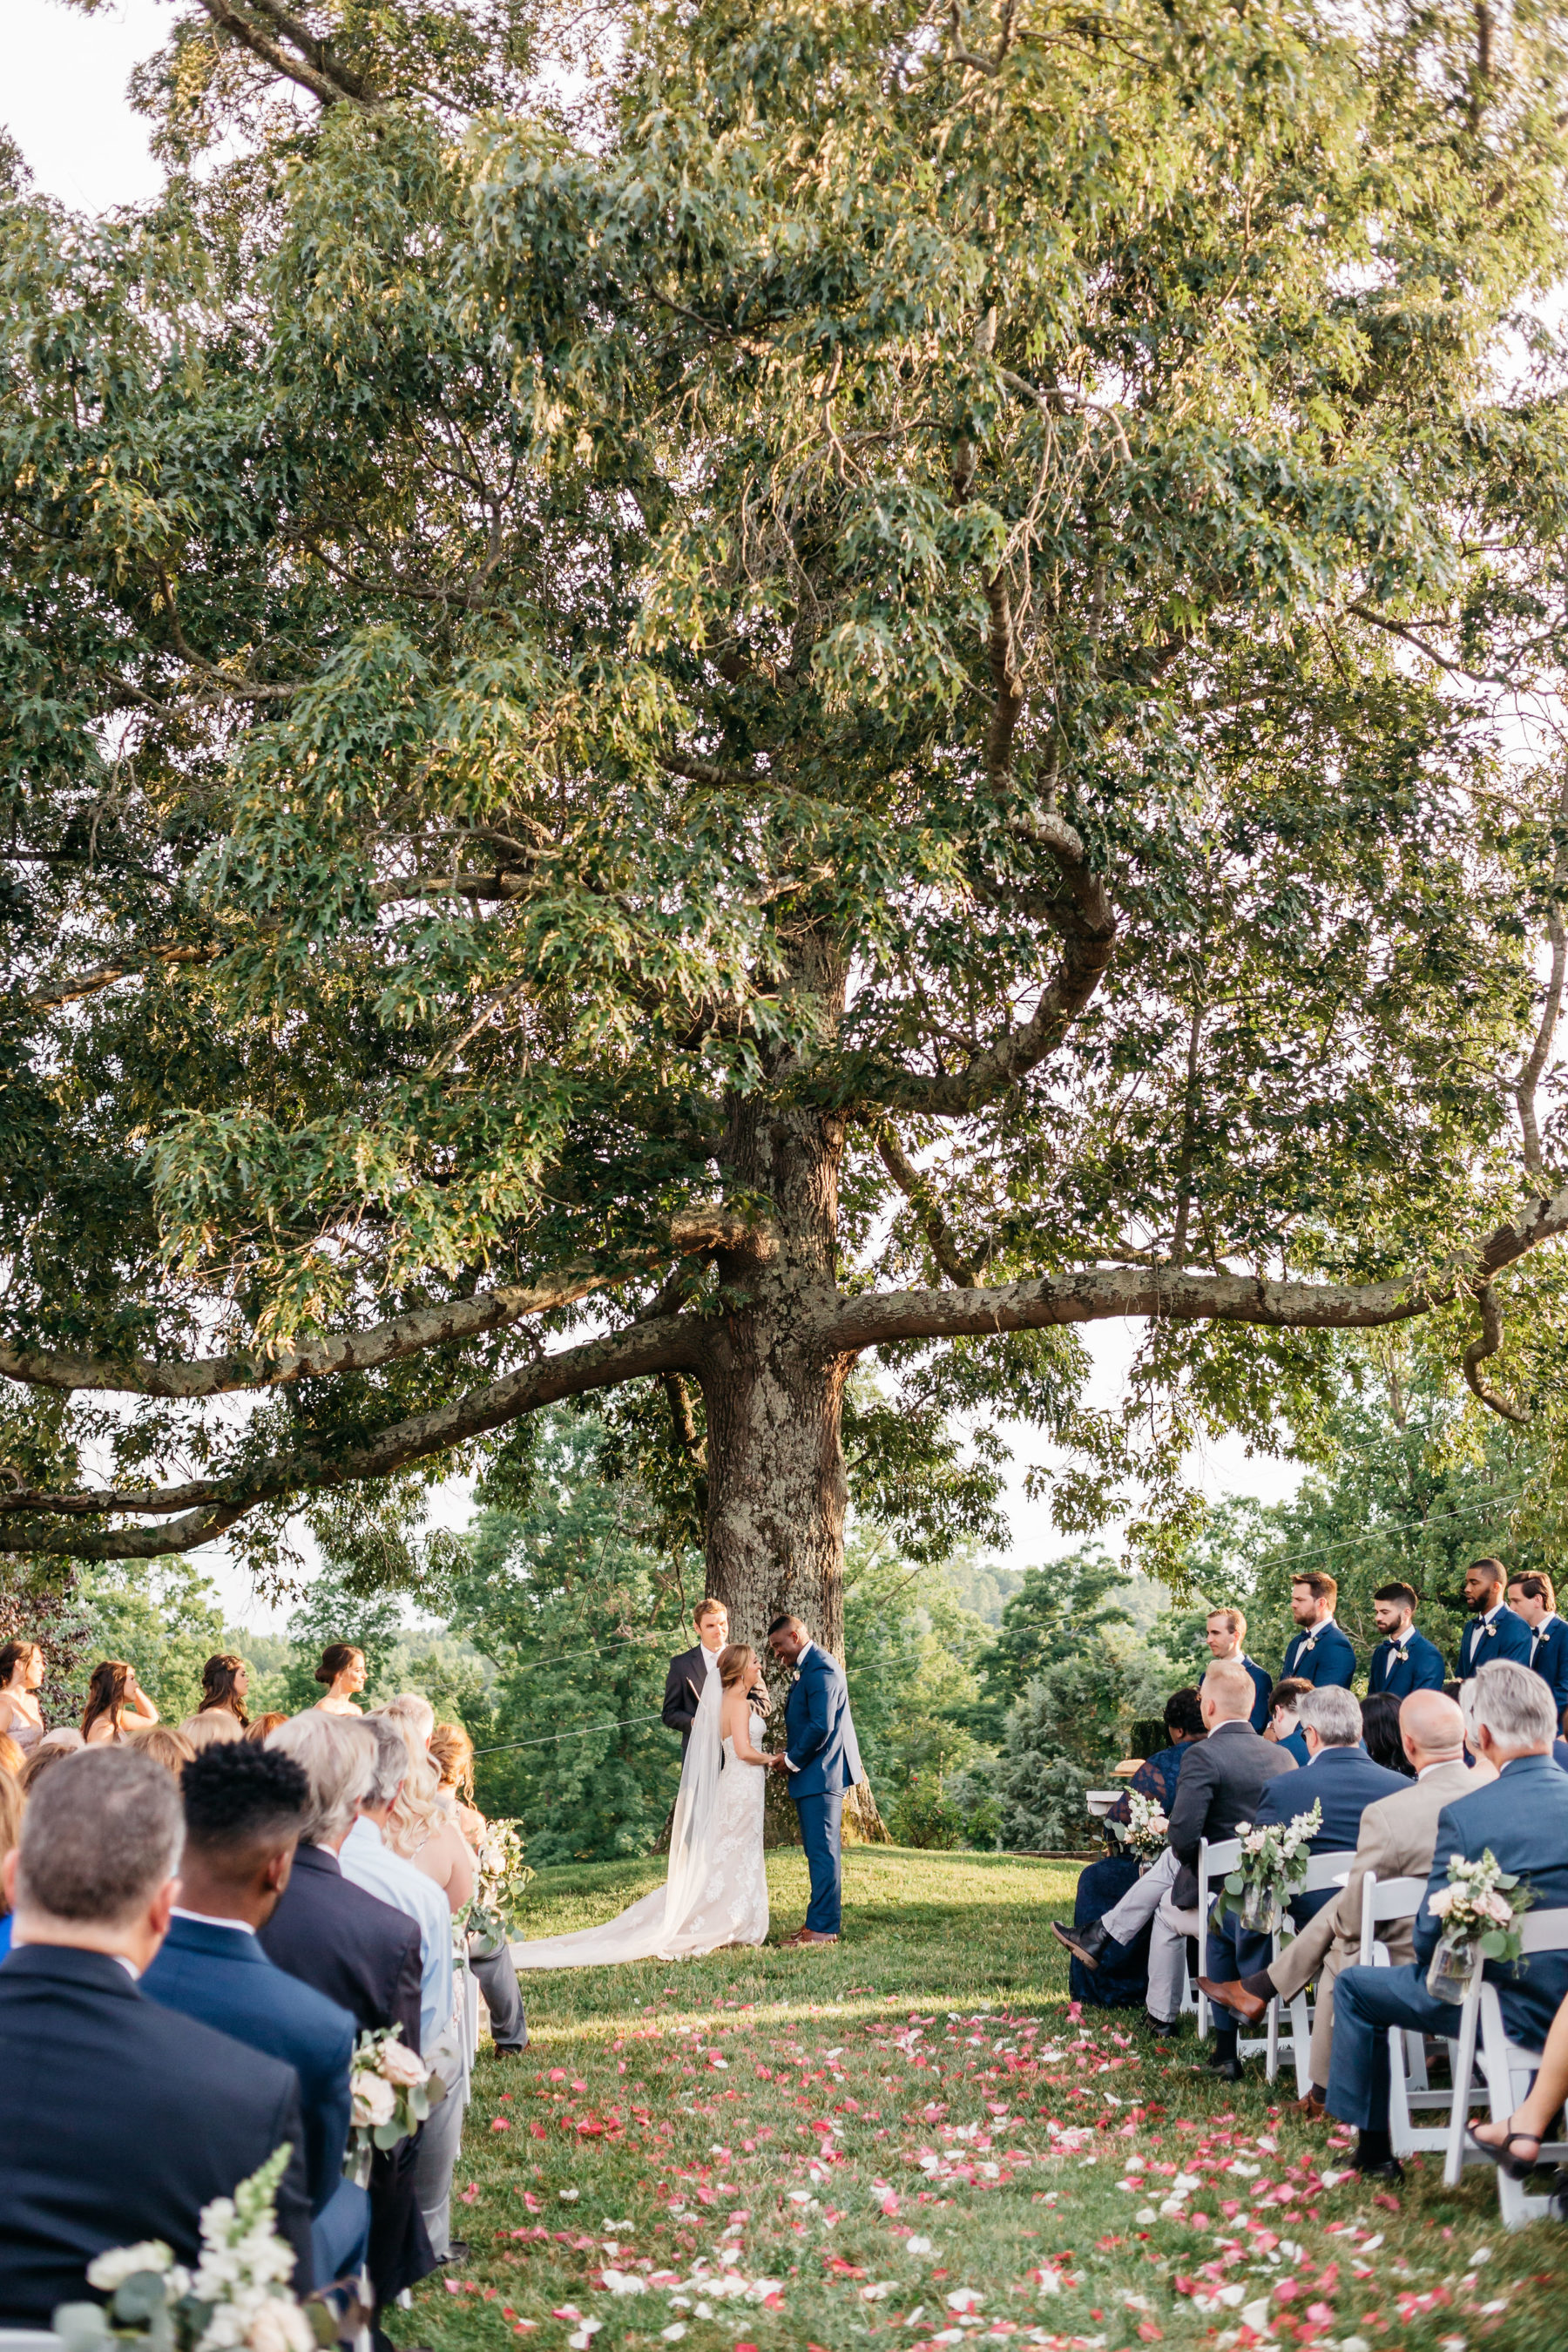 Outdoor wedding ceremony inspiration: Rustic Front Porch Farms wedding featured on Nashville Bride Guide